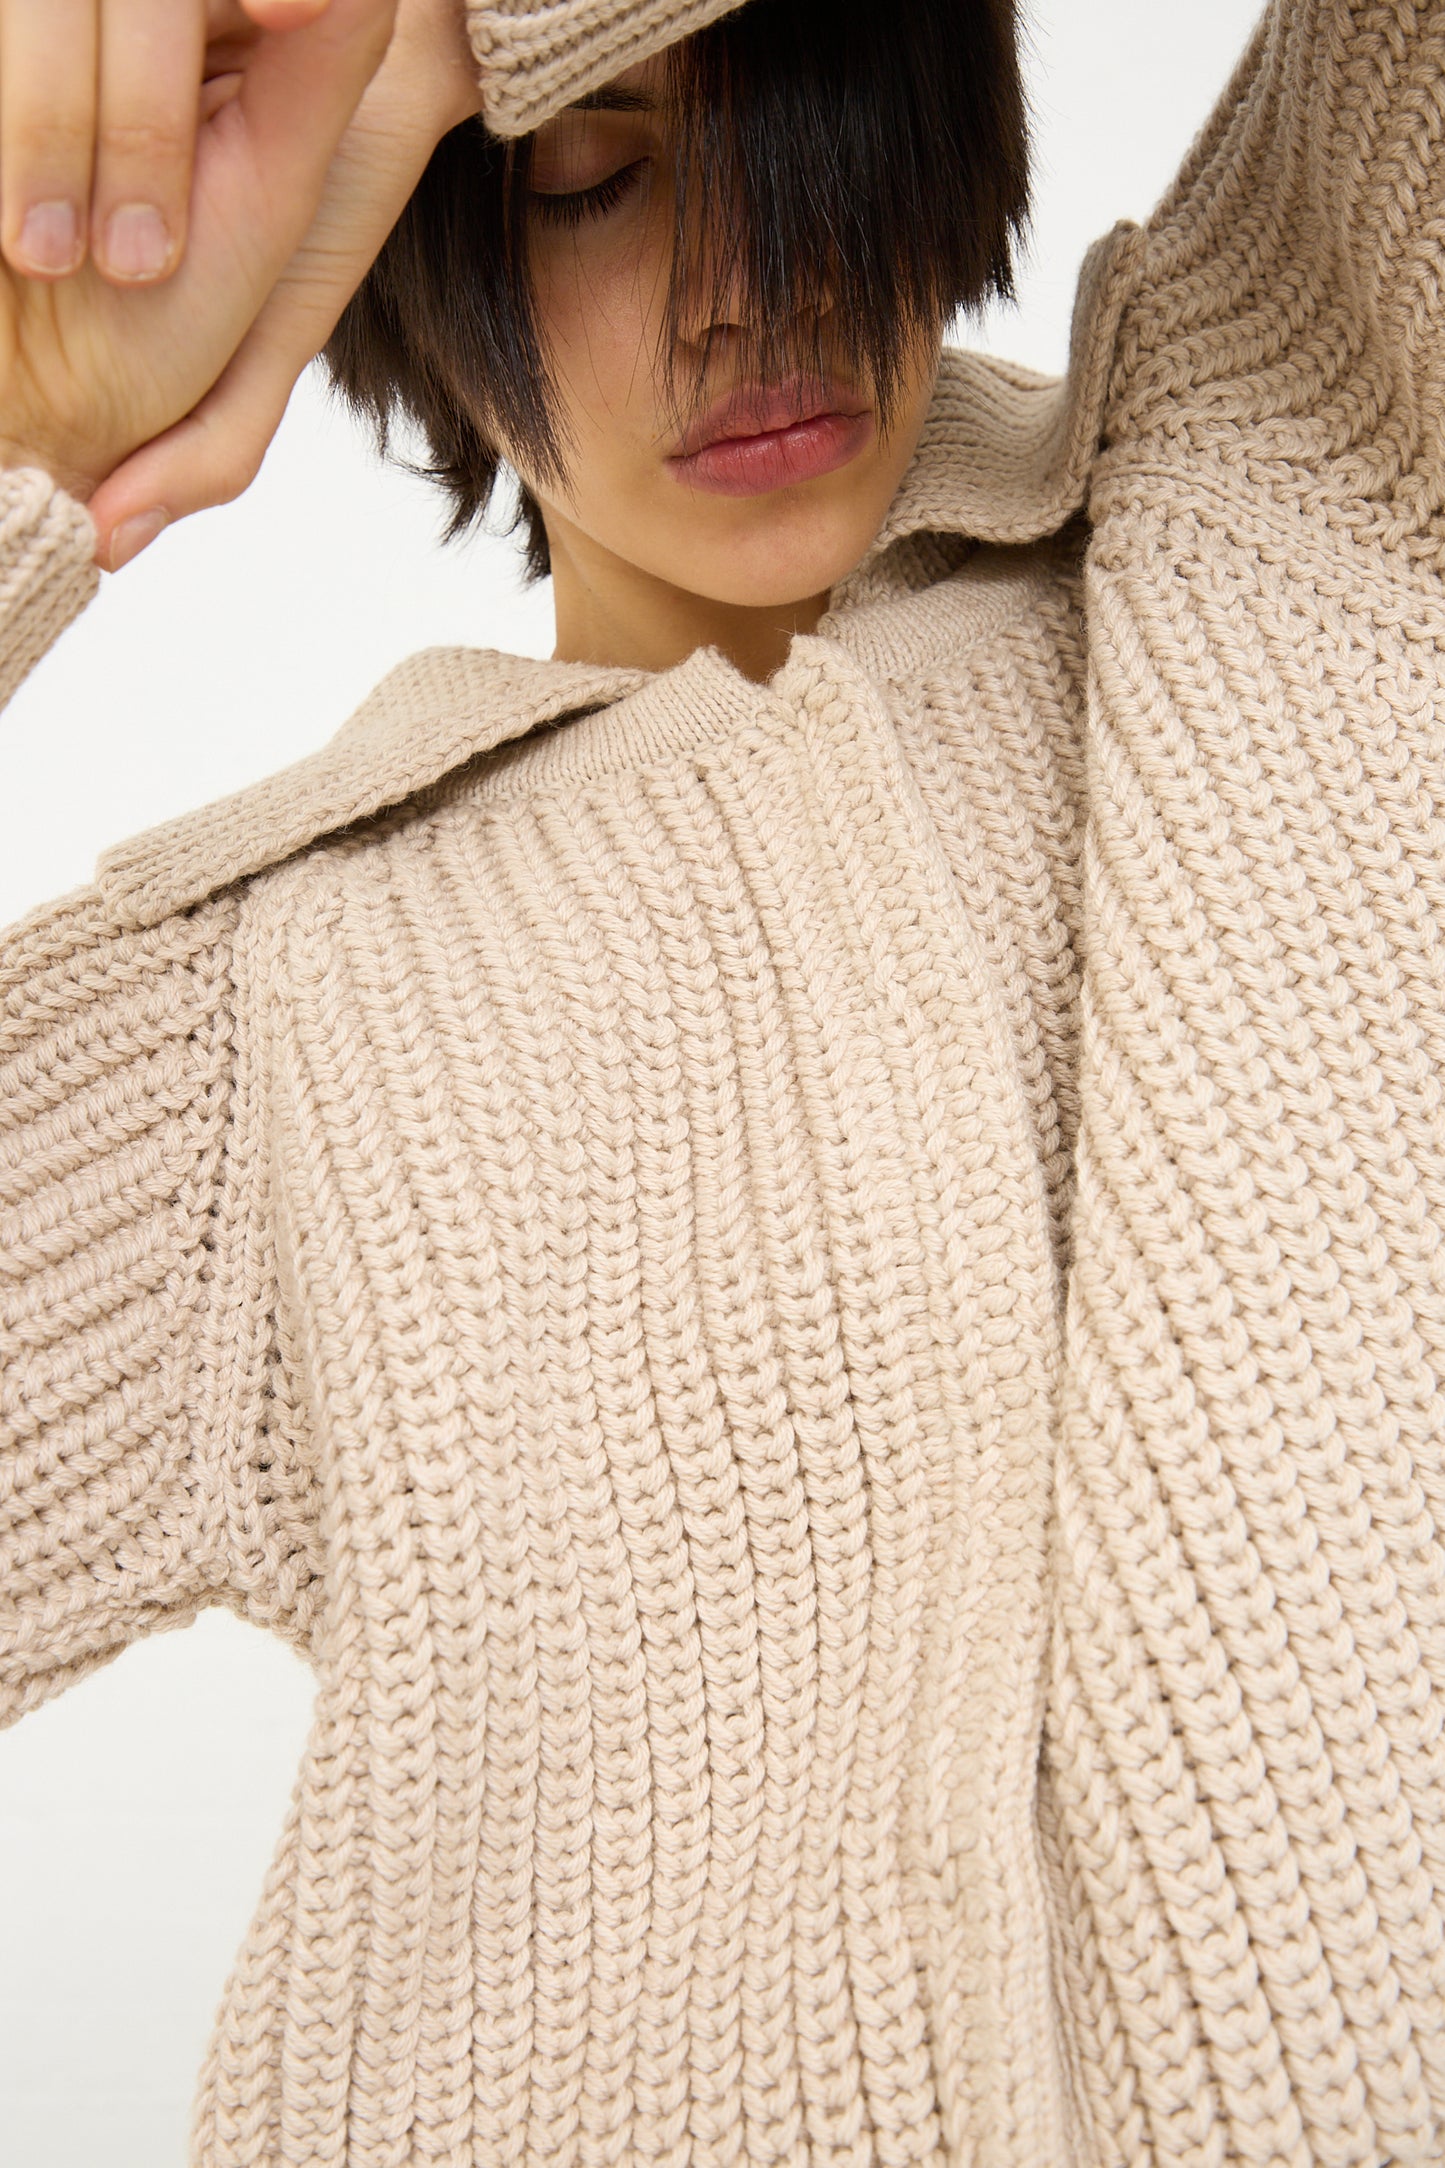 A person in a Caron Callahan Cotton and Alpaca Freda Cardigan in Ecru, with their hand resting on their forehead, partially obscuring their face.